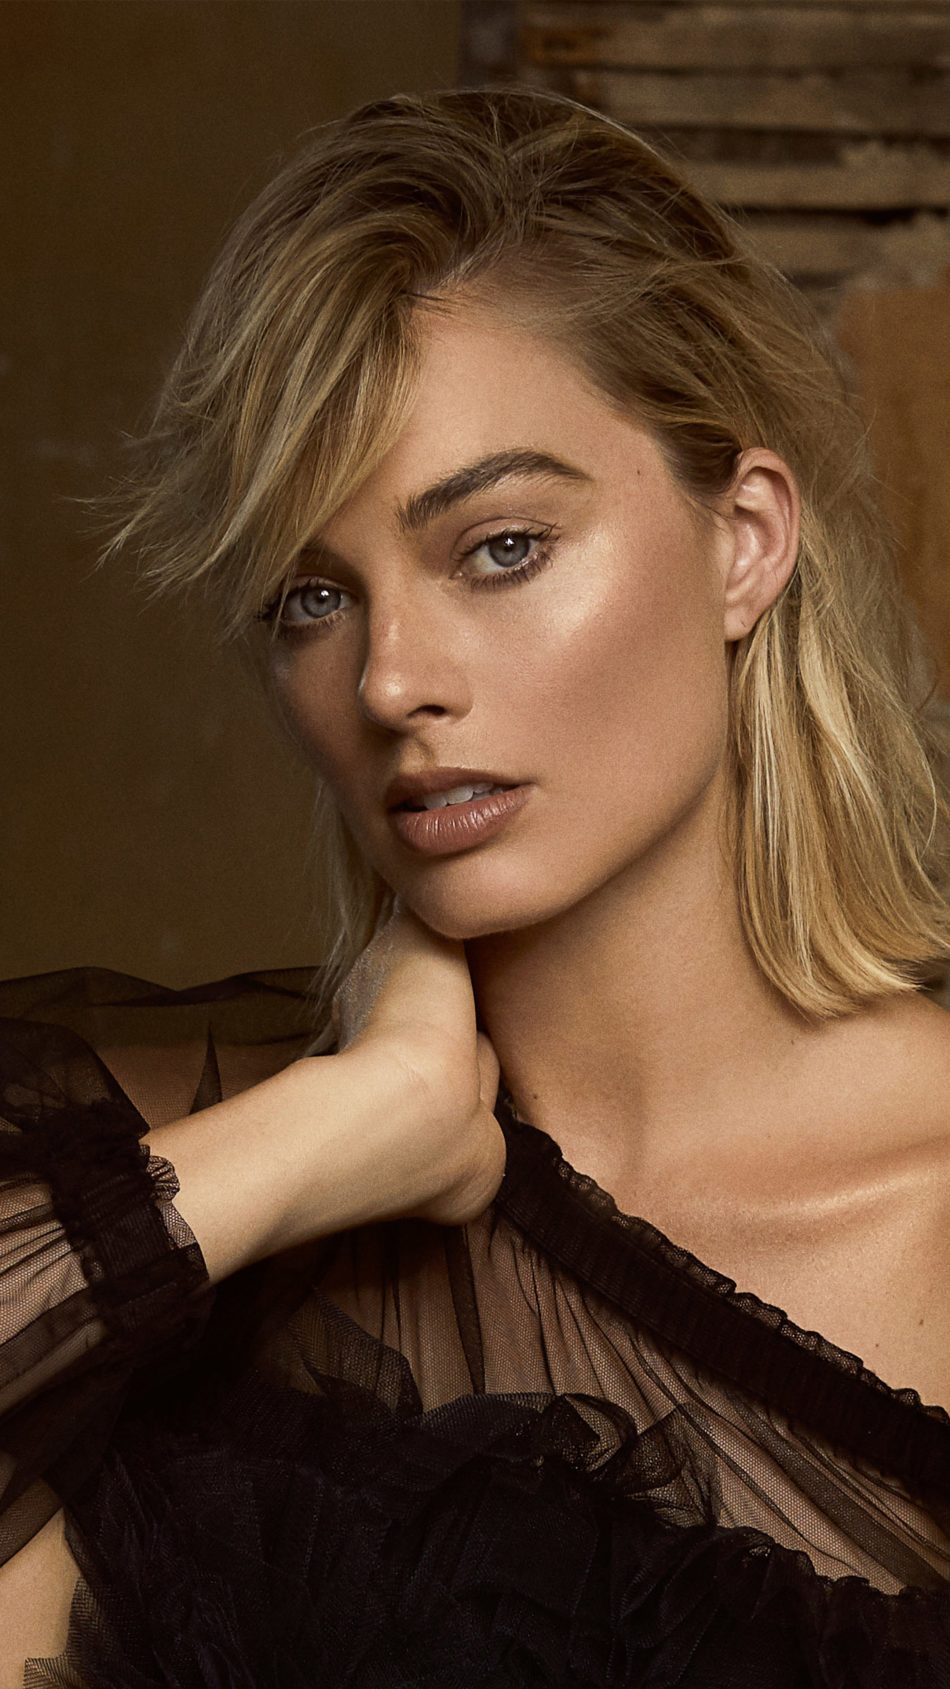 Download Margot Robbie 2019 Pure 4k Ultra Hd Mobile - Margot Robbie Wallpaper Hd , HD Wallpaper & Backgrounds